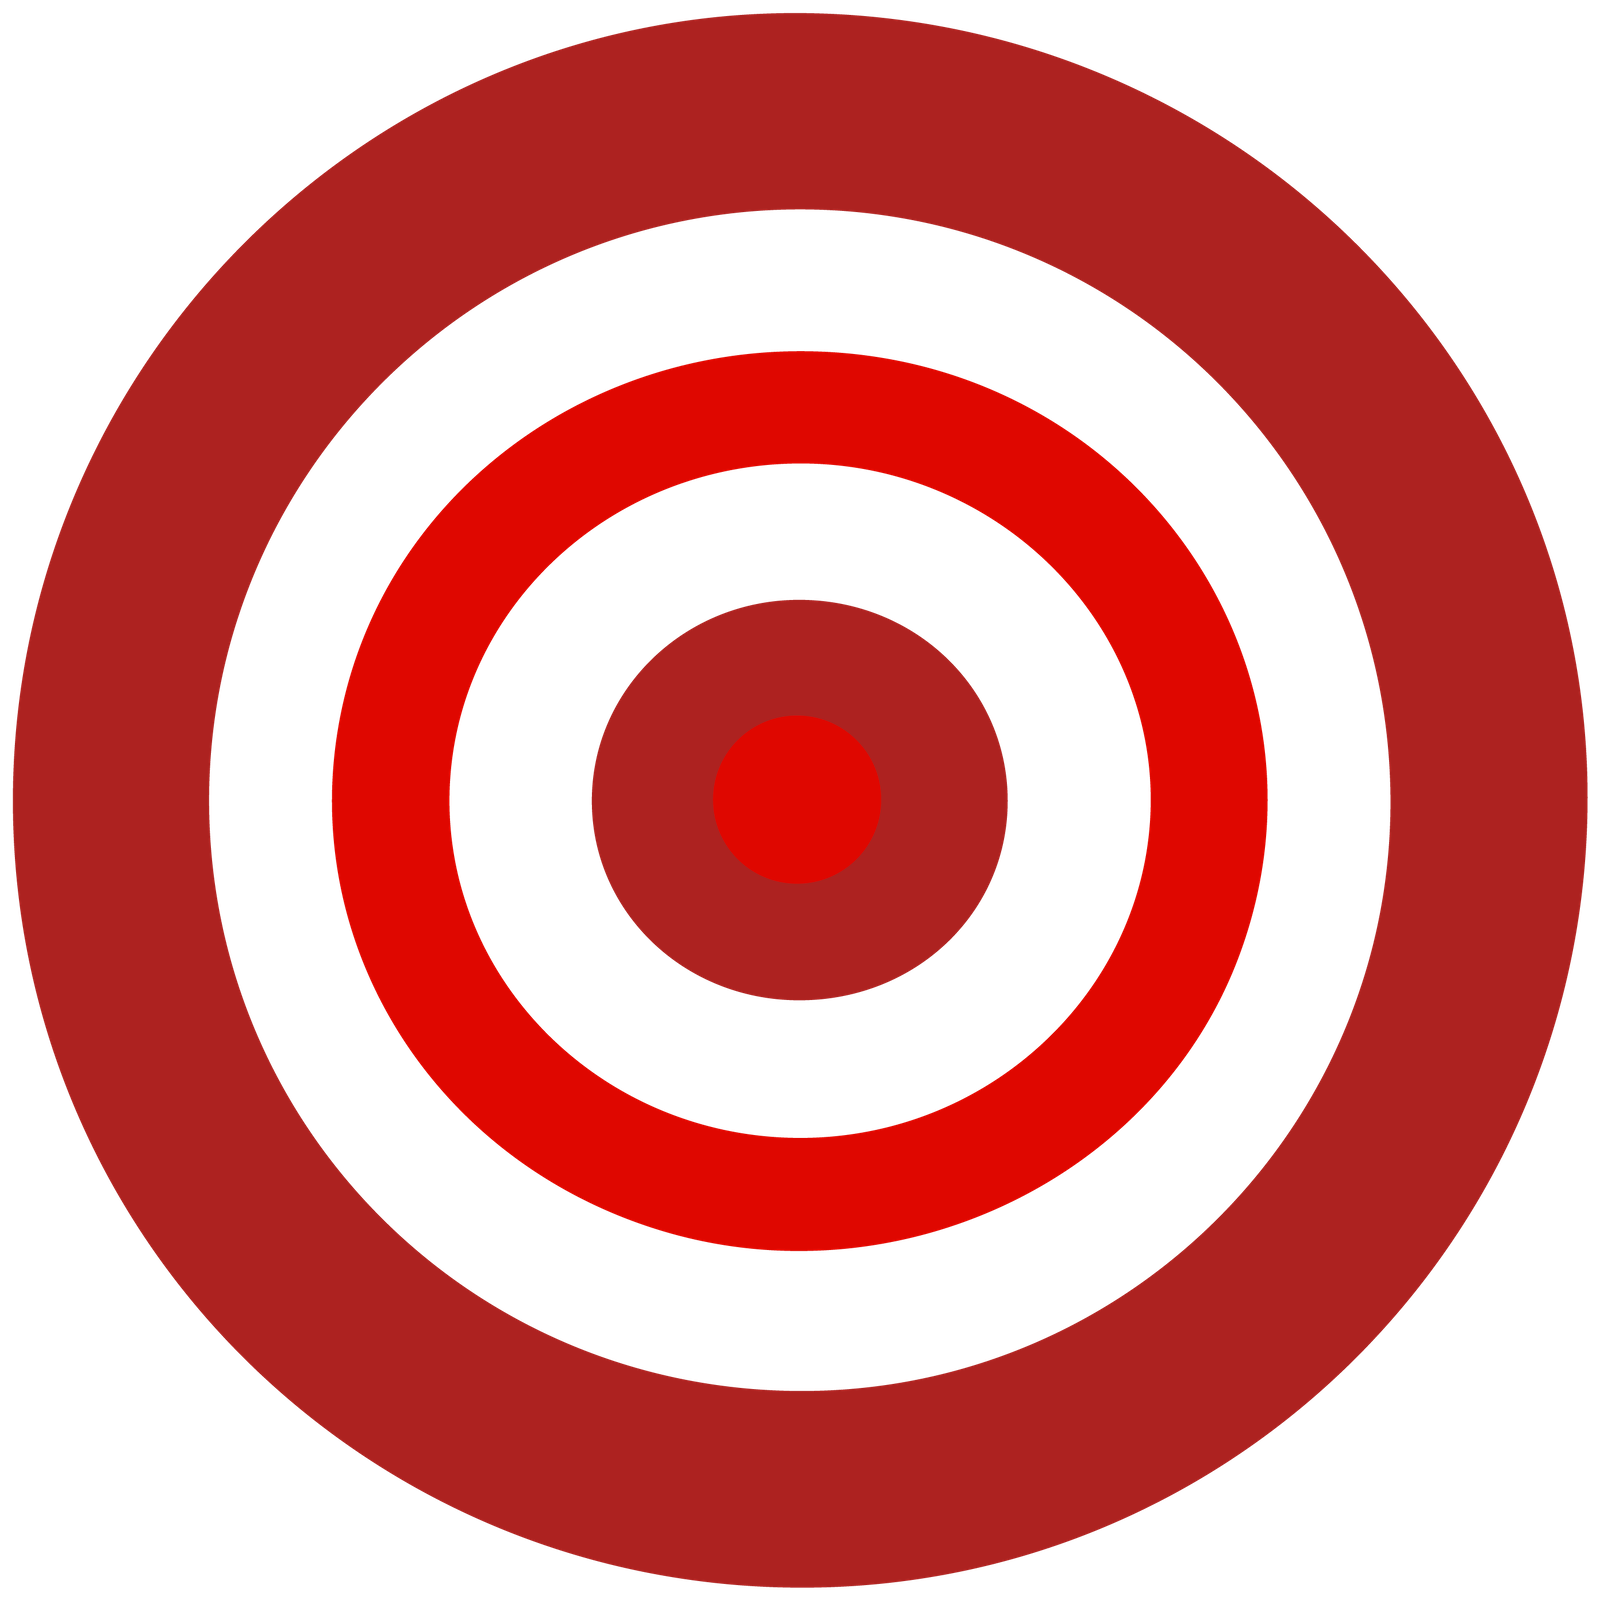 Icon motif with three concentric circles